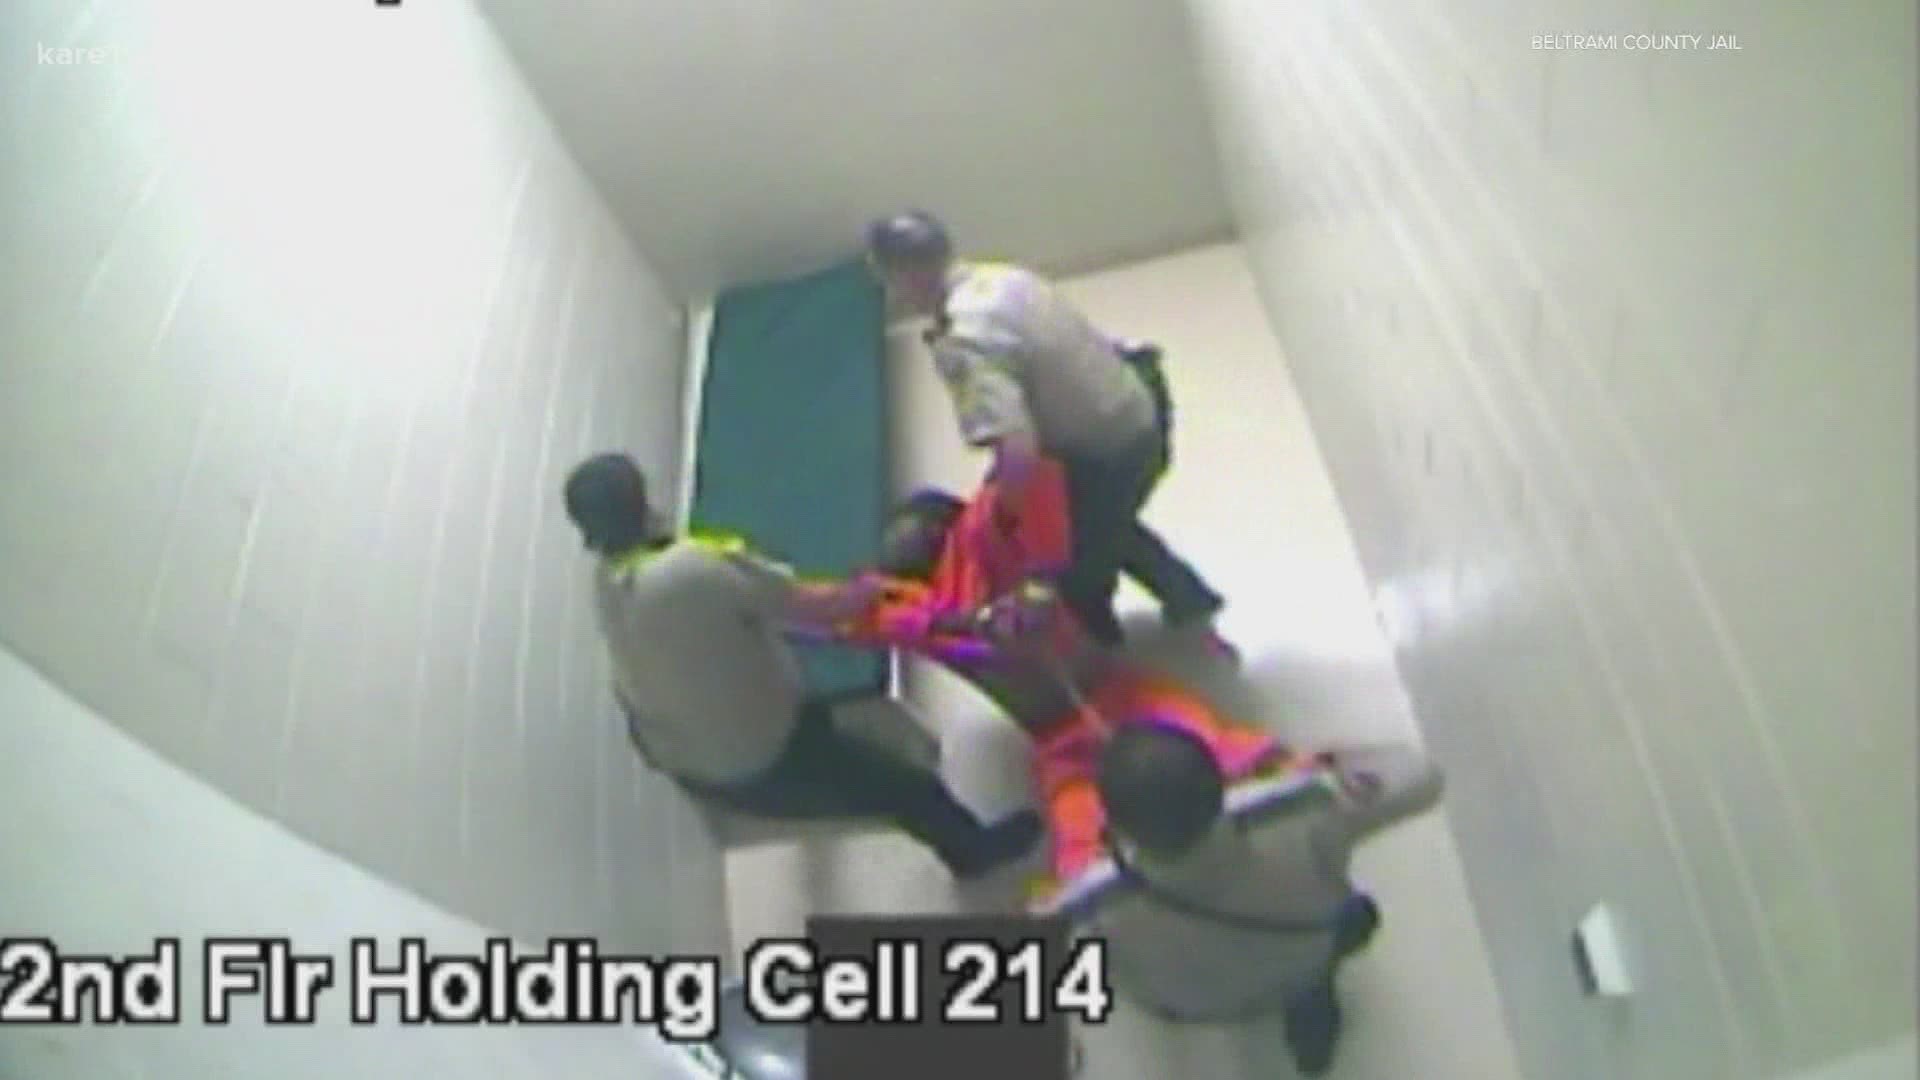 Records obtained by KARE 11 reveal 50 deaths in Minnesota jails over the last five years.